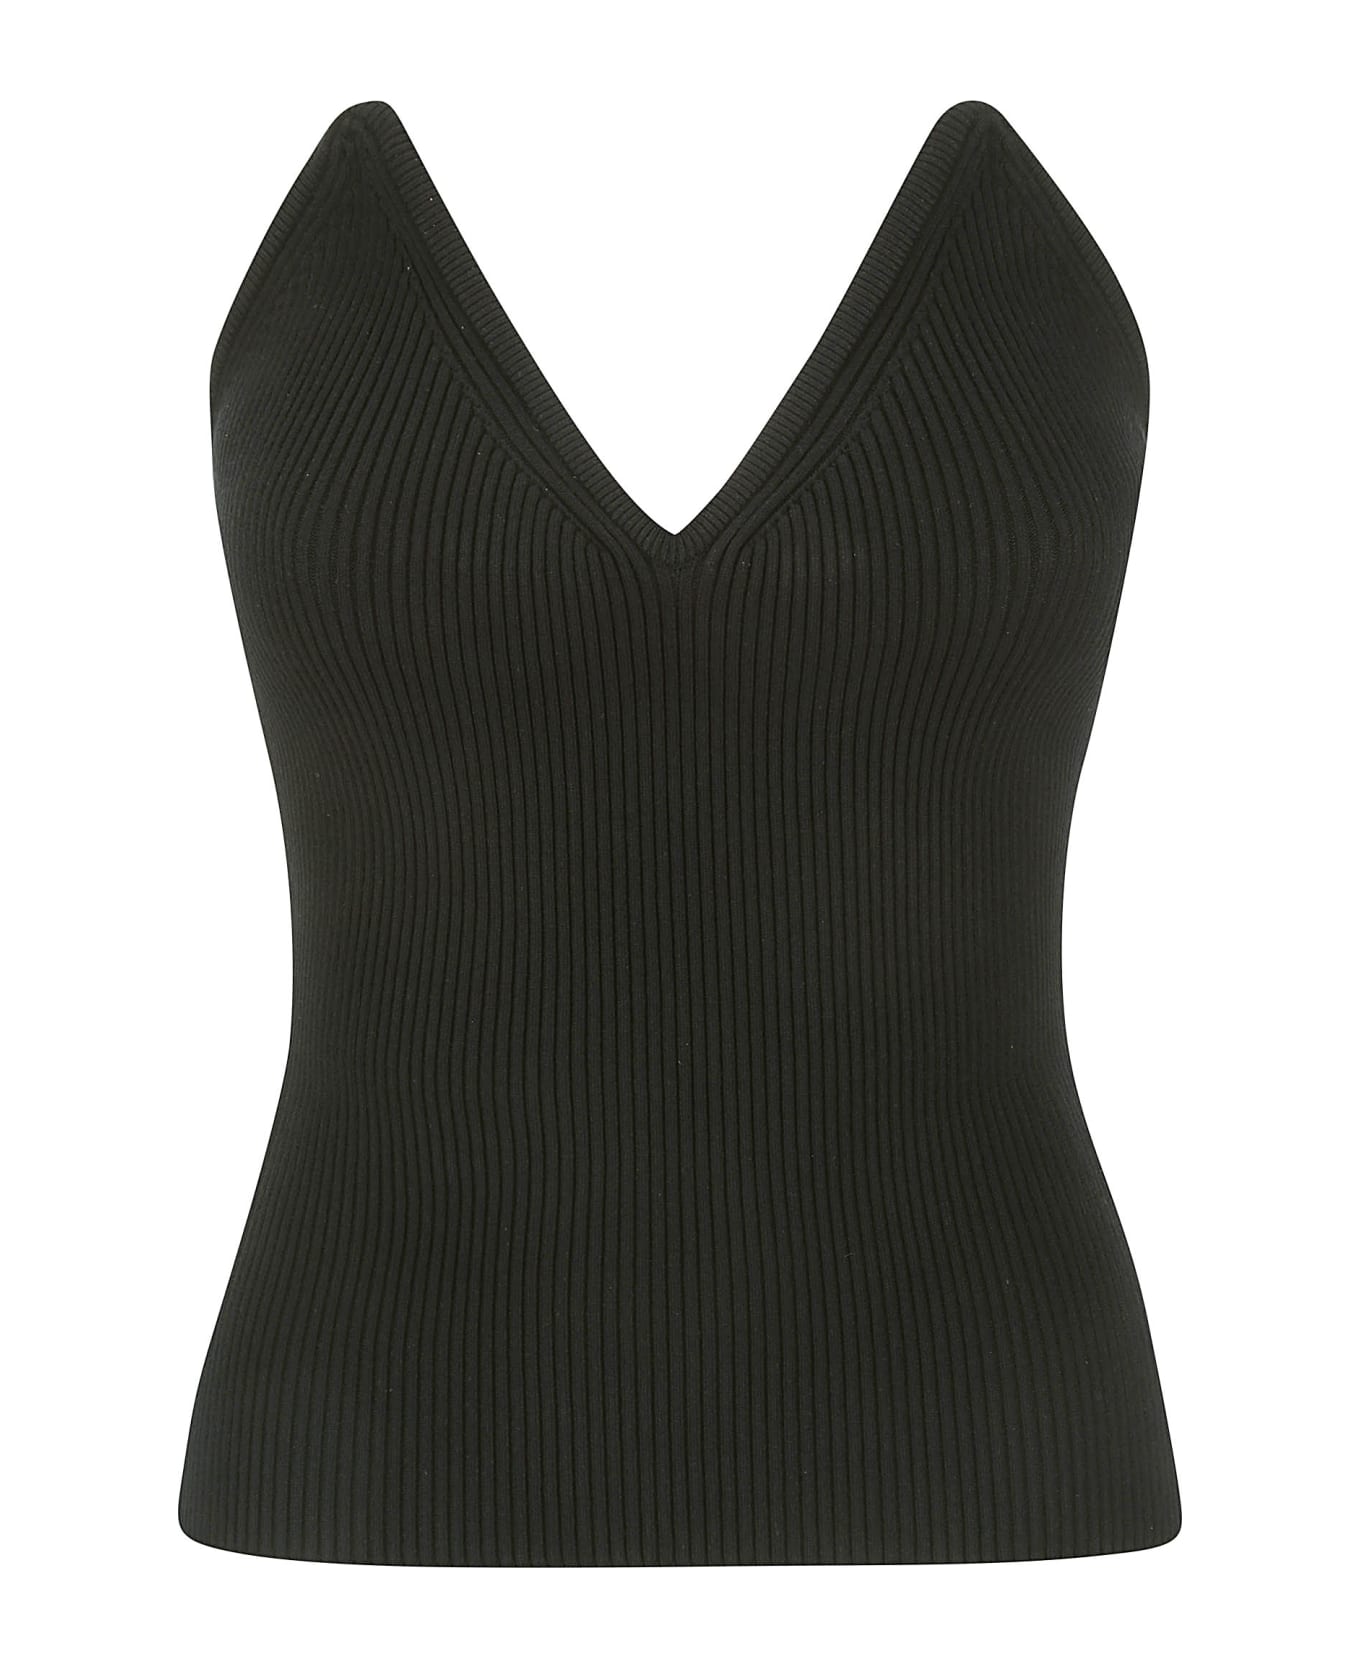 Coperni Knitted Bustier Top - BLACK